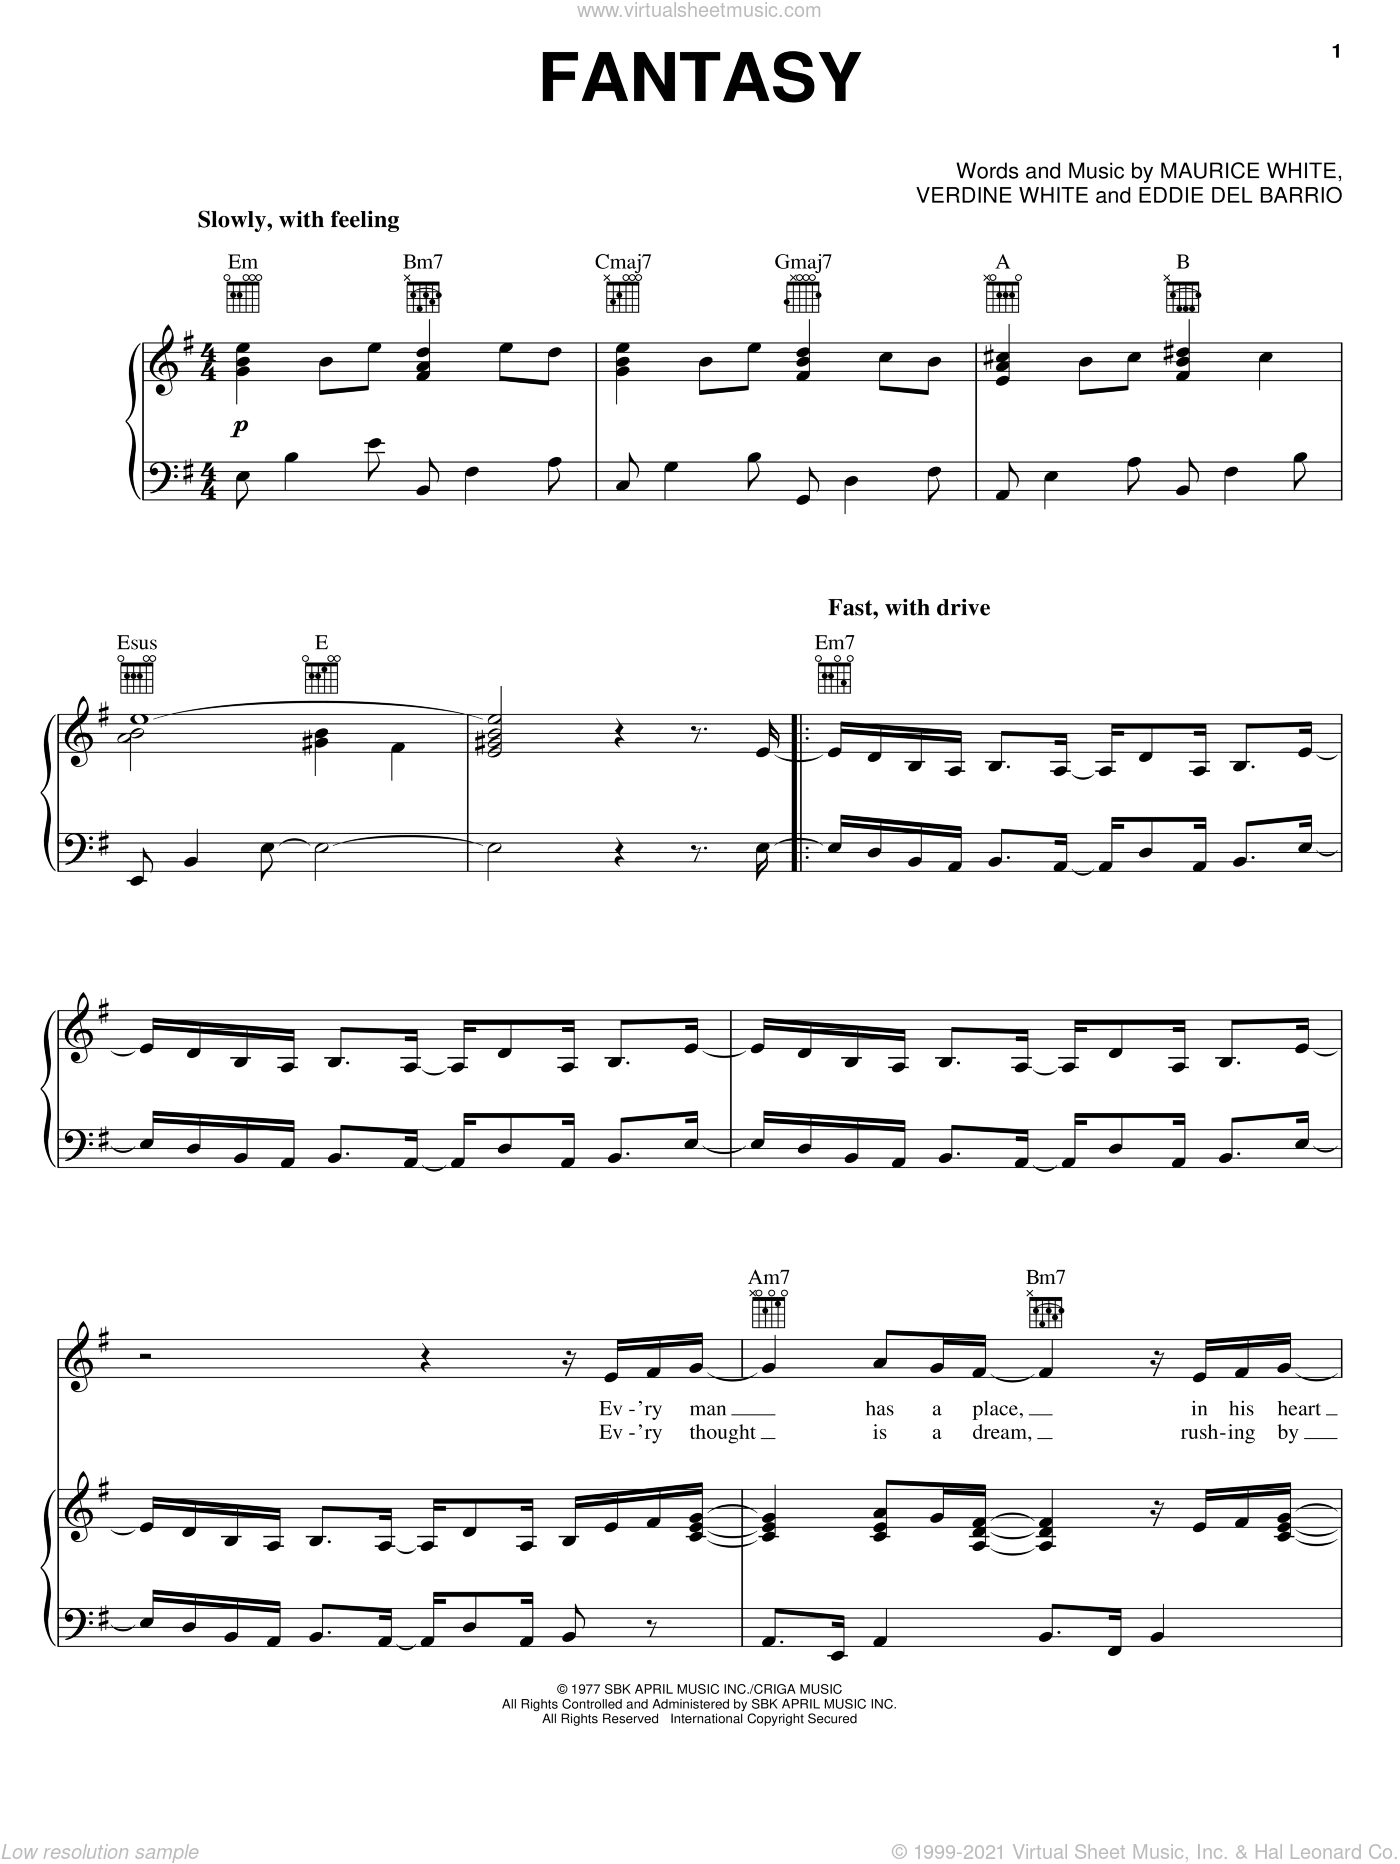 premier Verspilling lippen Earth, Wind & Fire: Fantasy sheet music for voice, piano or guitar